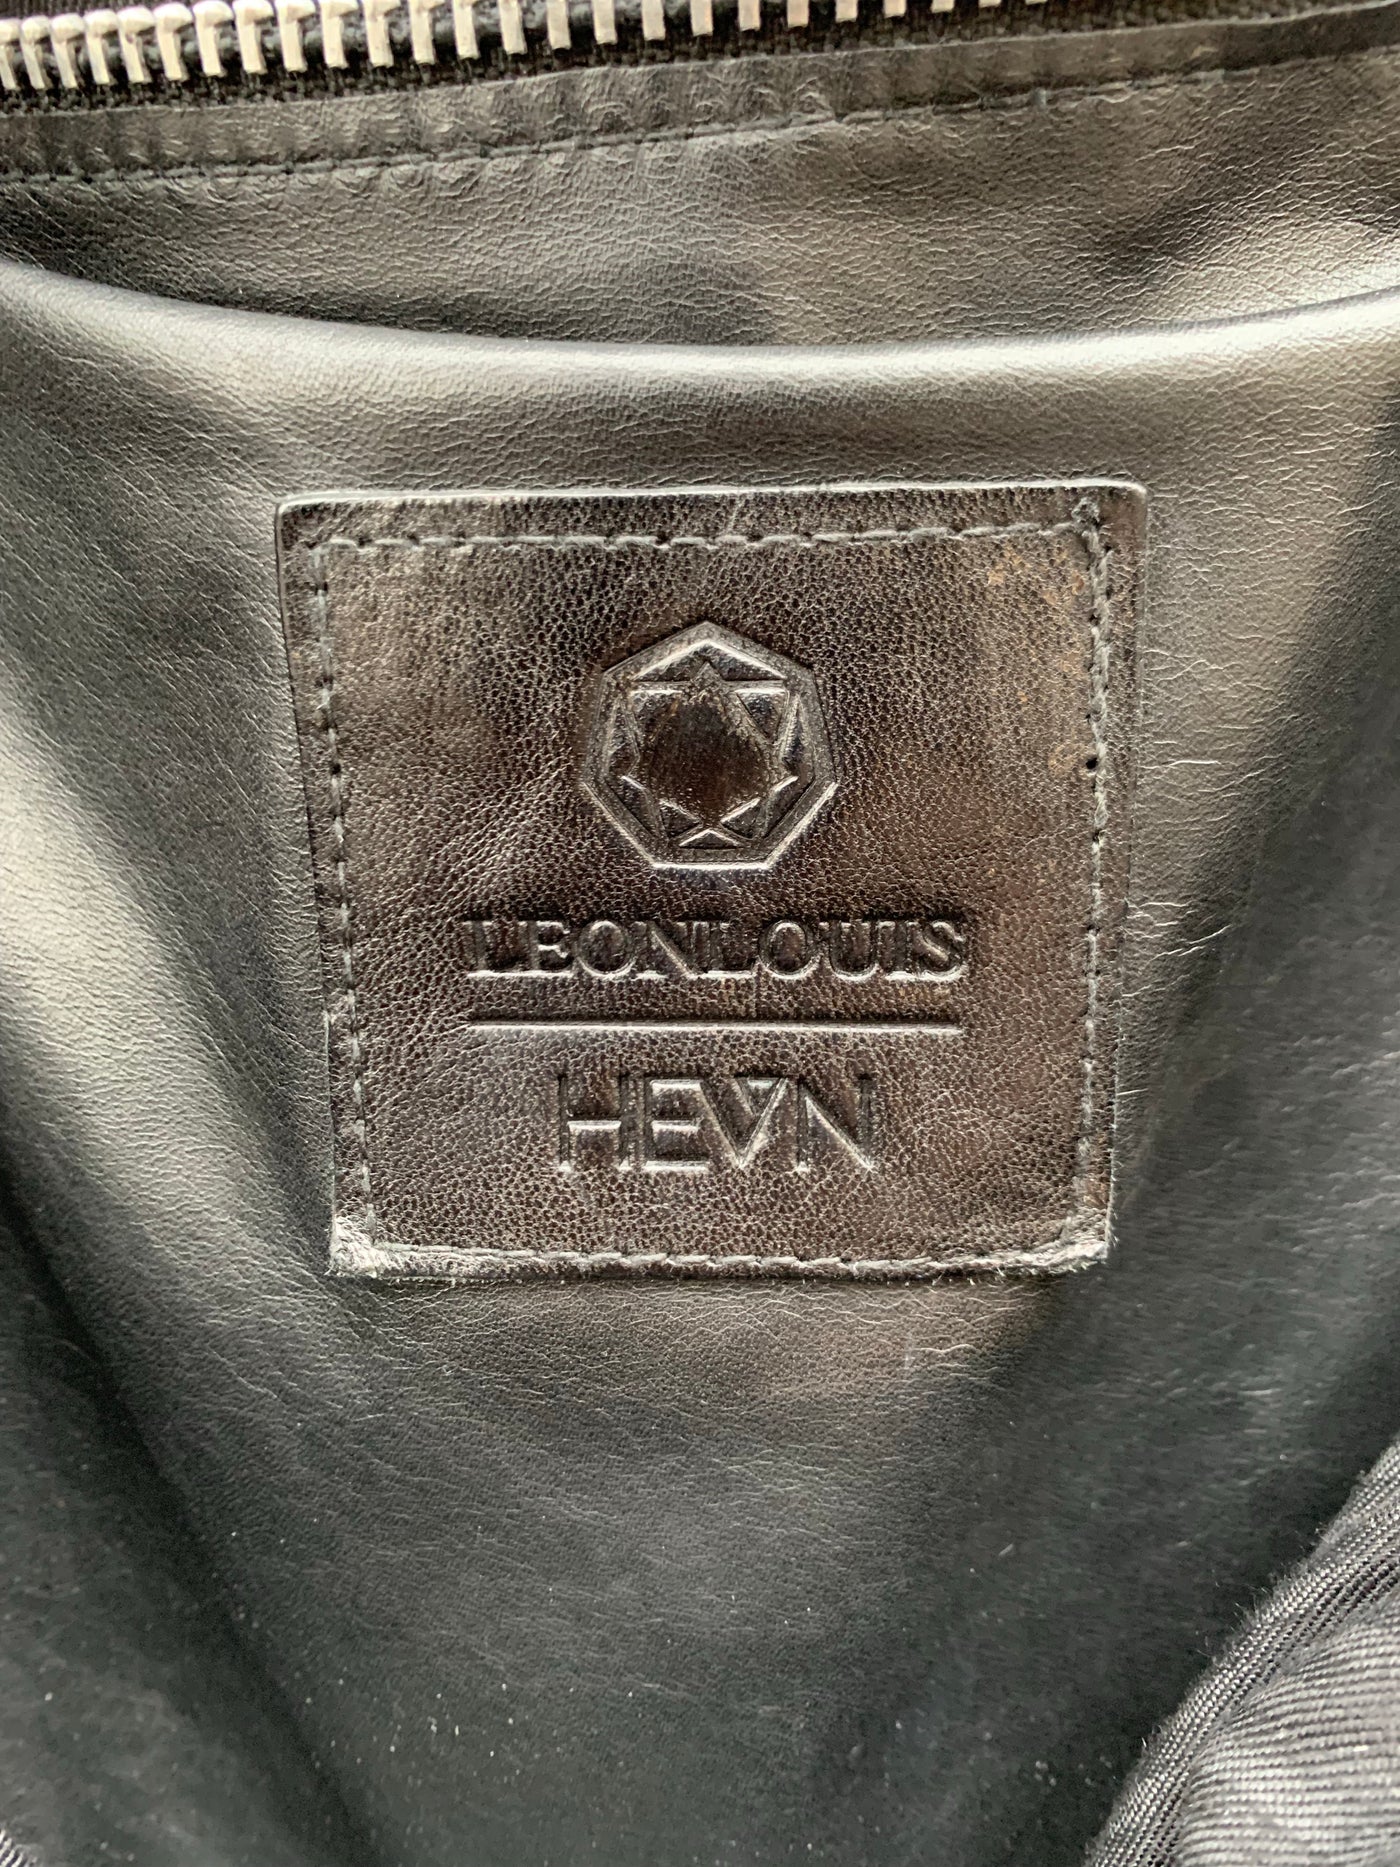 Leon Louis x HEVN Limited edition TENEBRIS leather tote